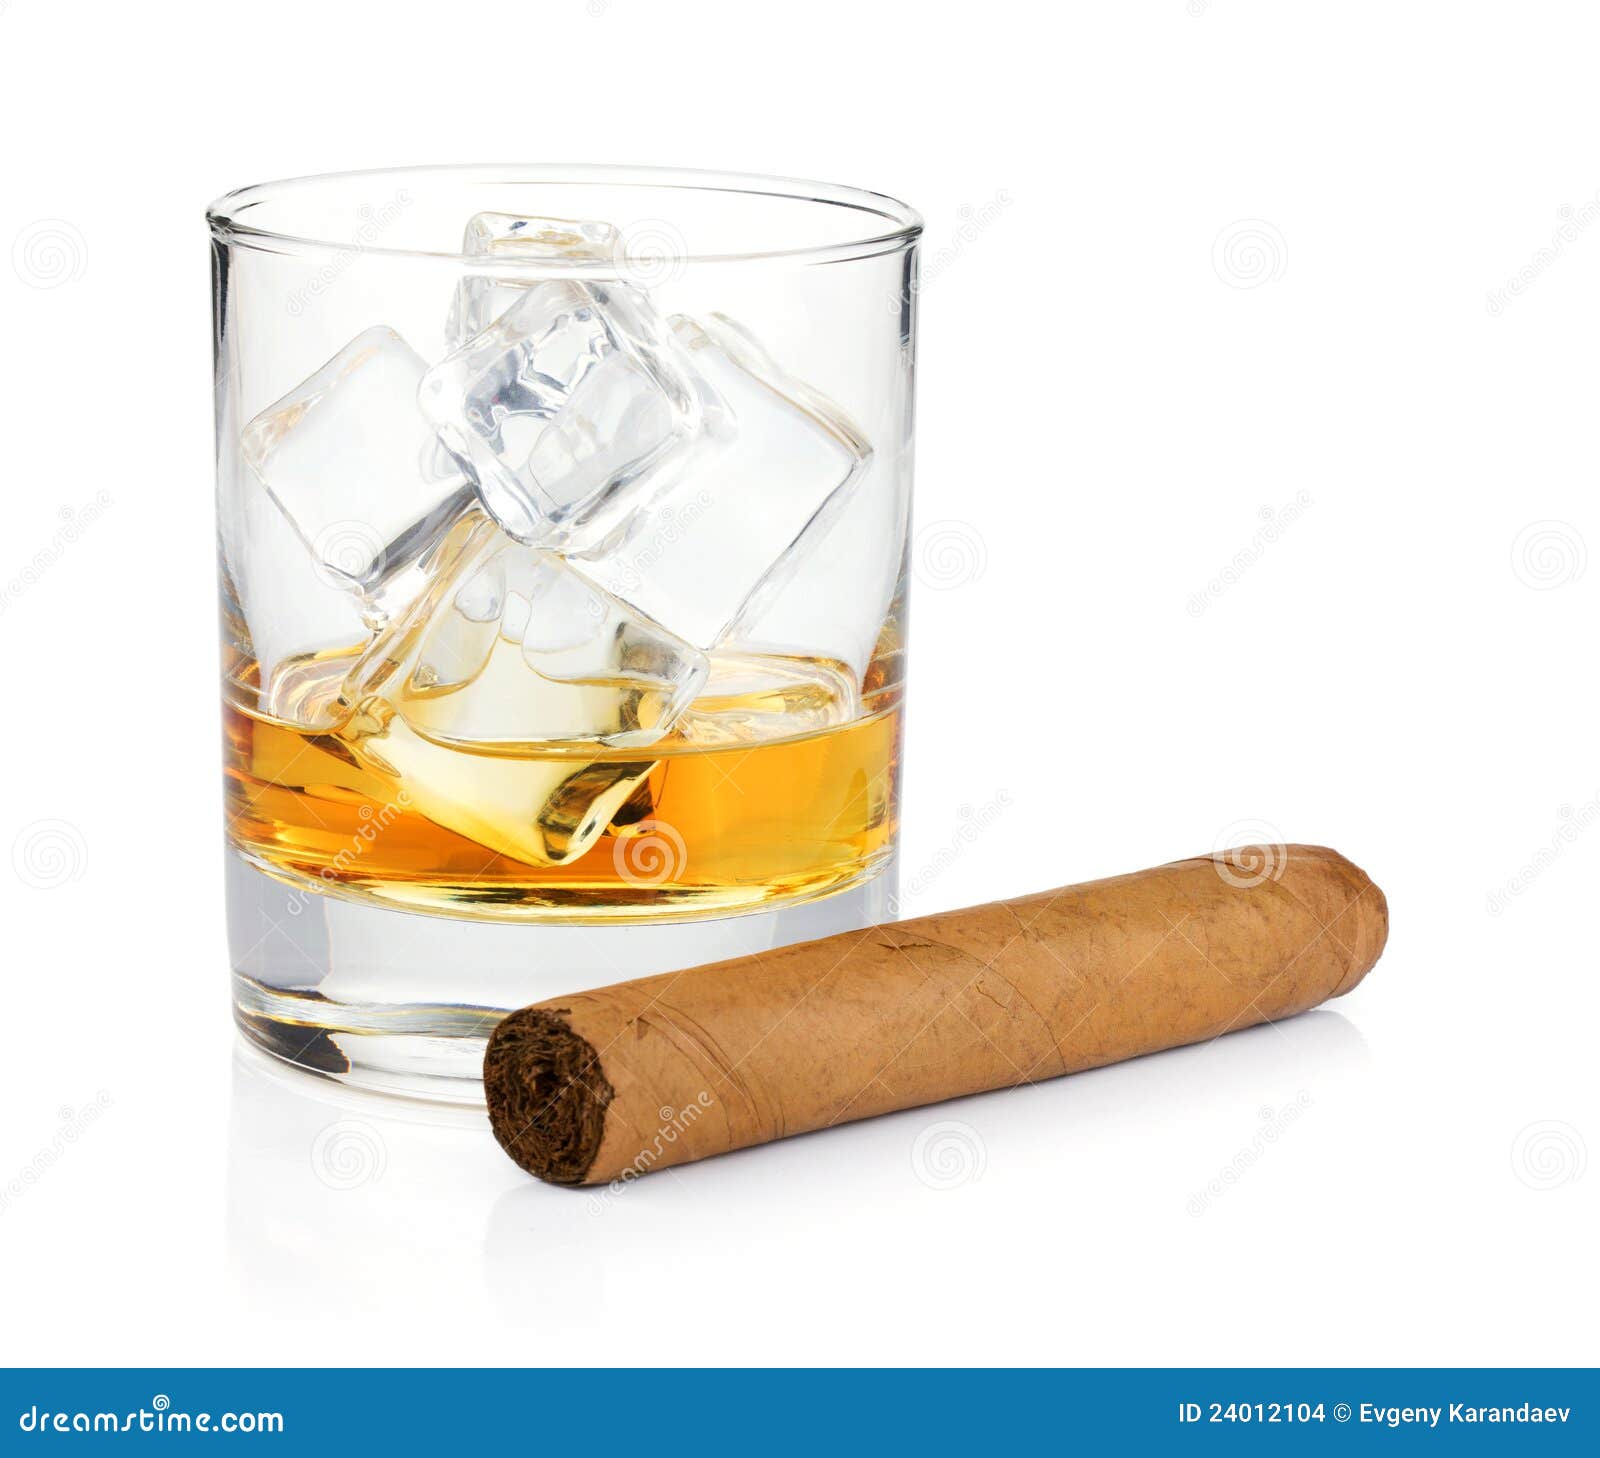 tumbler of scotch Images  24012104 Whiskey And Stock Cigar Glass  Image: